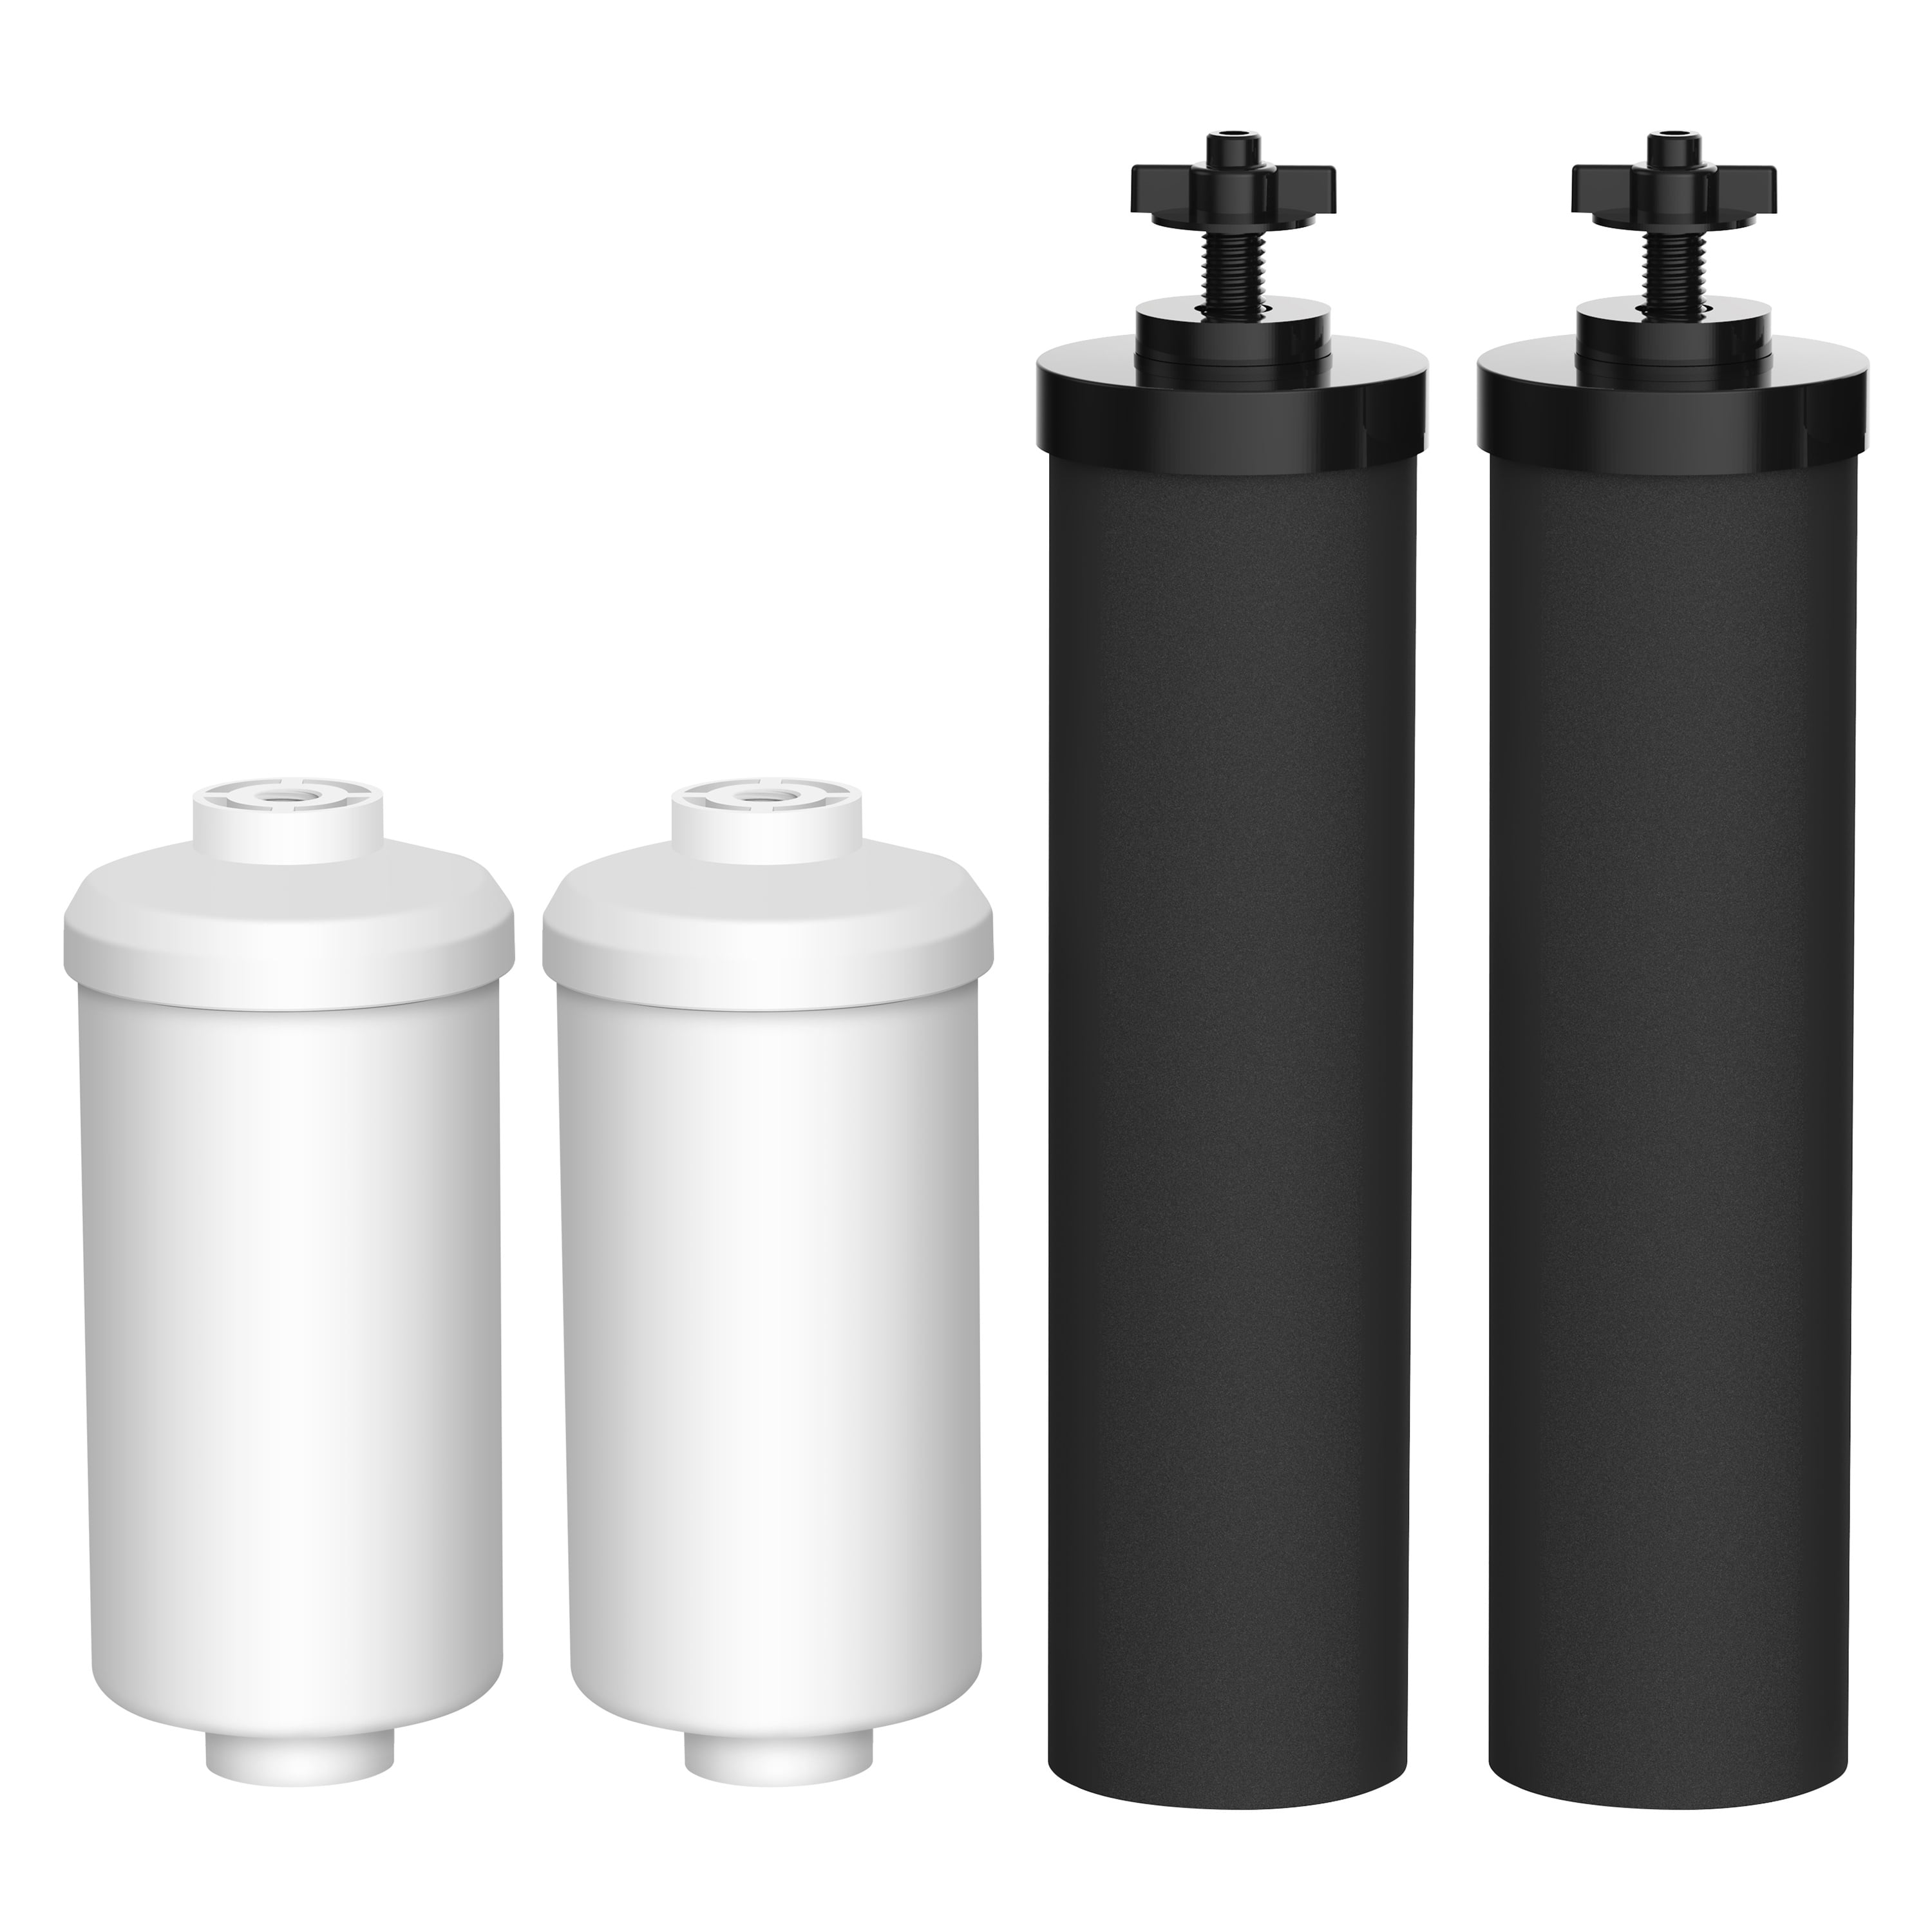 BB9-2 Combo Pack and Gravity Filter System Includes 2 Black Filters and 2 Fluoride Filters AQUACREST Water Filter Replacement for Black Filters PF-2 & Fluoride Filters